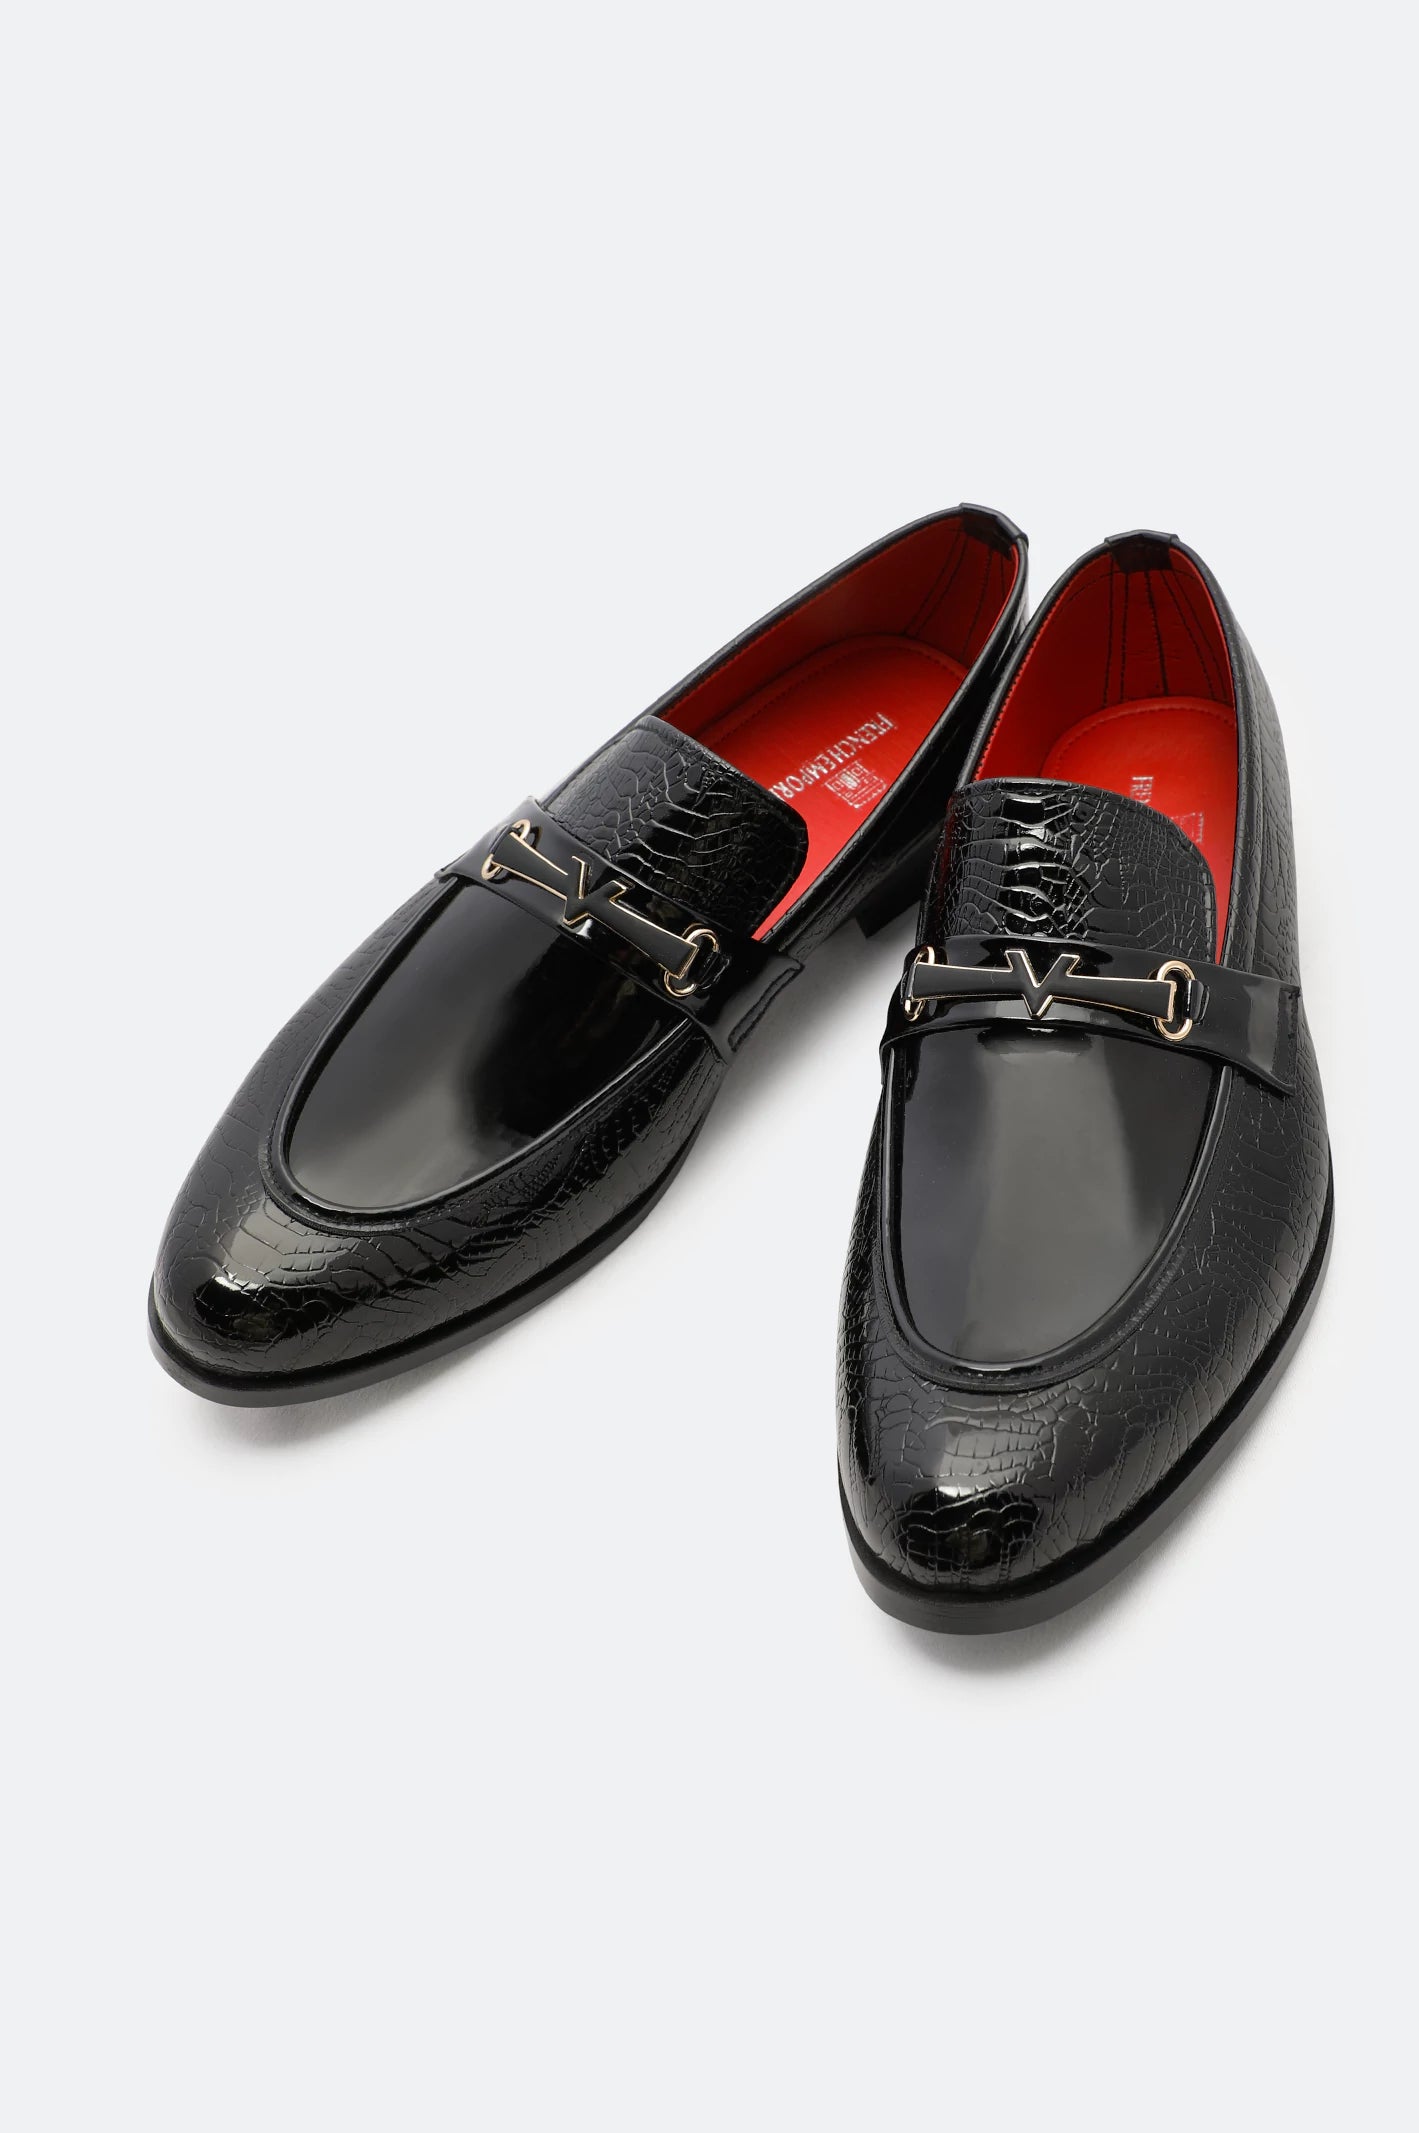 Black Formal Shoes From Diners